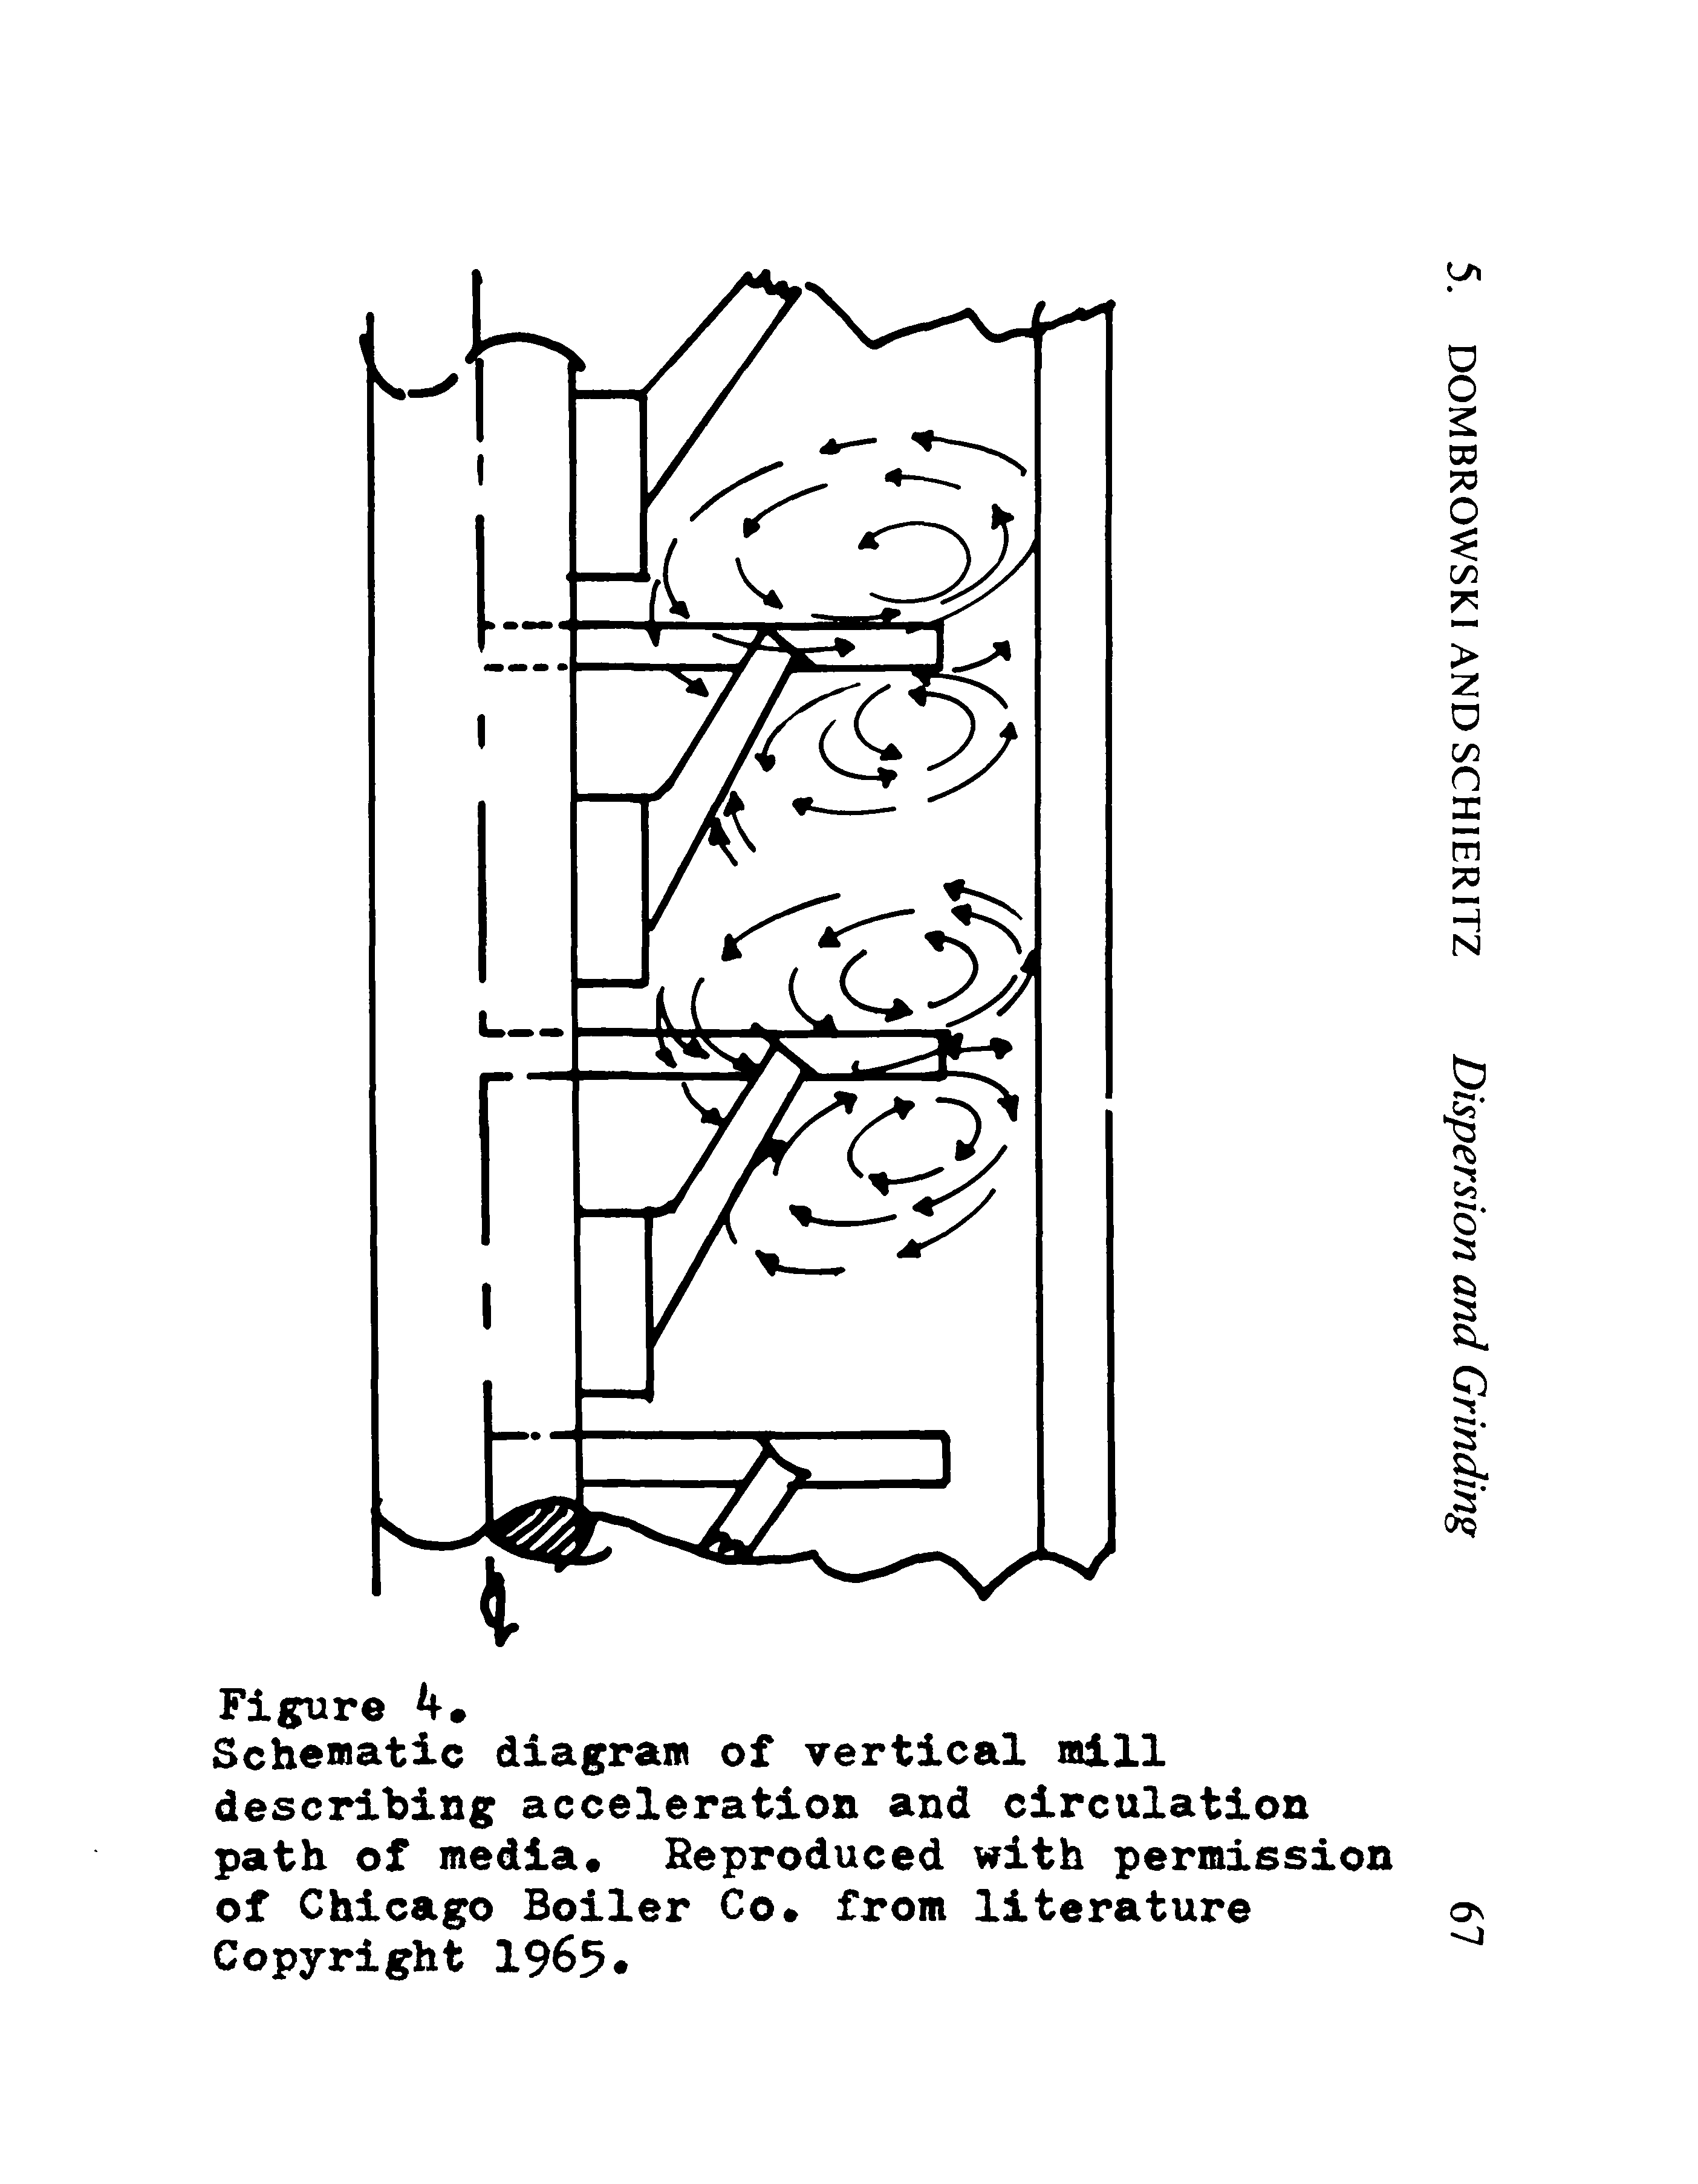 Schematic diagram of vertical mill describing acceleration and circulation path of media. Reproduced with permission of Chicago Boiler Co. from literature Copyright 1965 ...